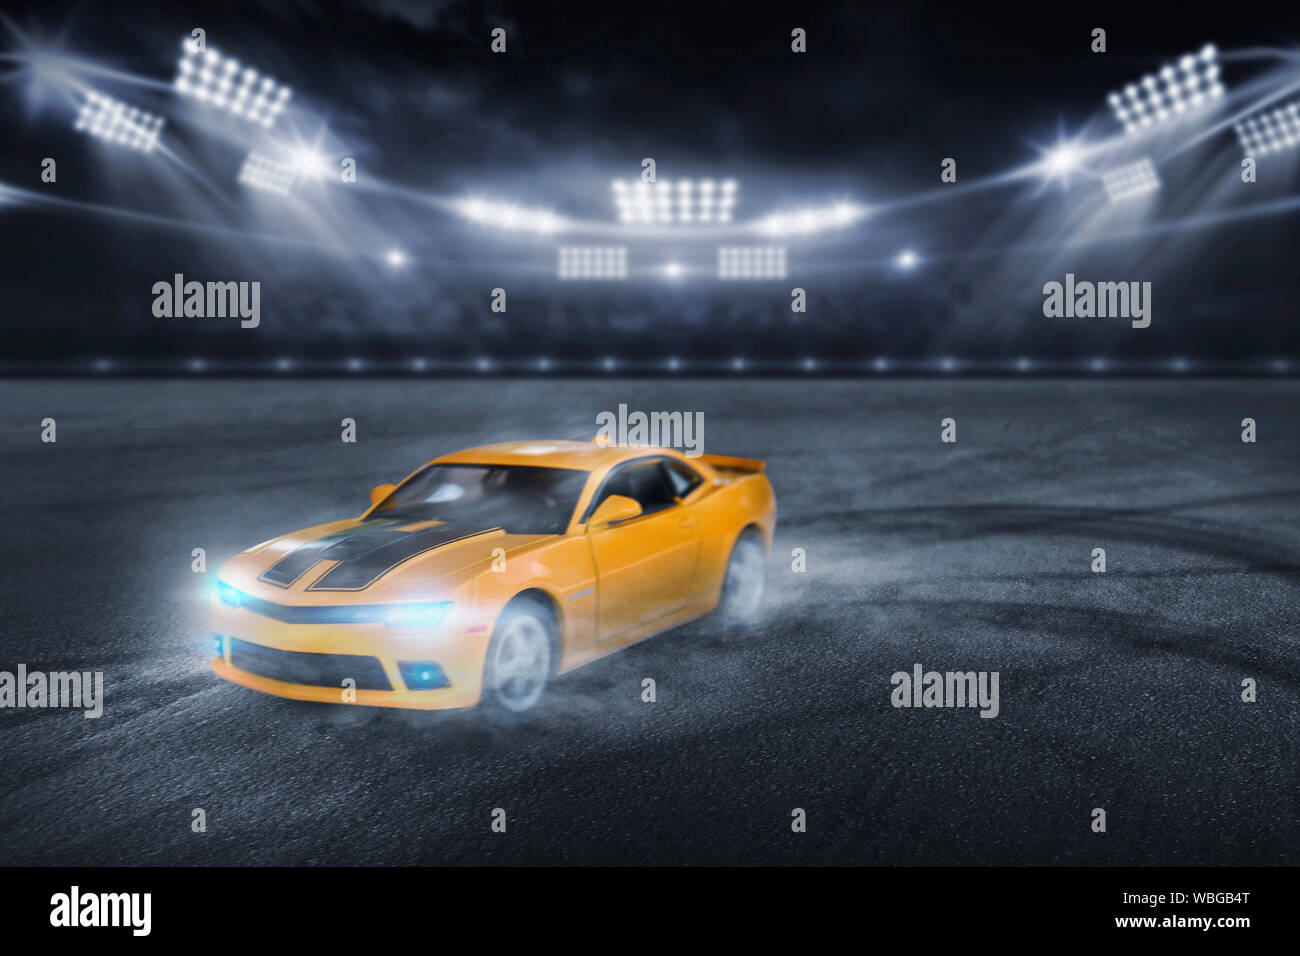 3D rendering the yellow sports racing car, Drift racer, Race car racing on speed track at night with motion blur. Stock Photo